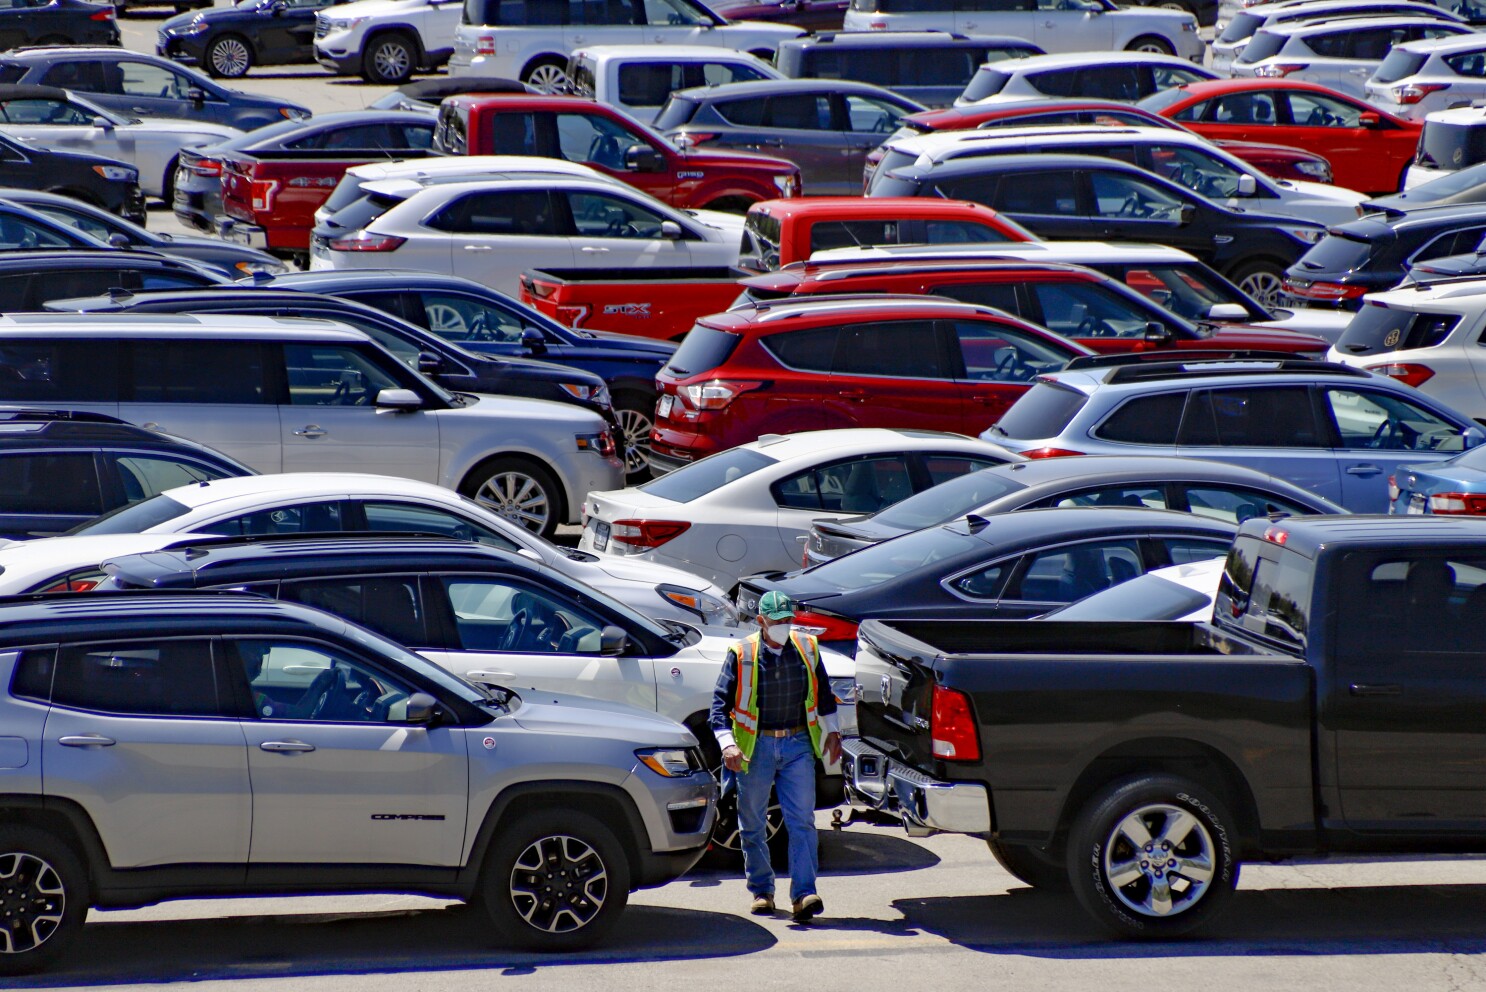 Used car prices are sky-high now. Here's why